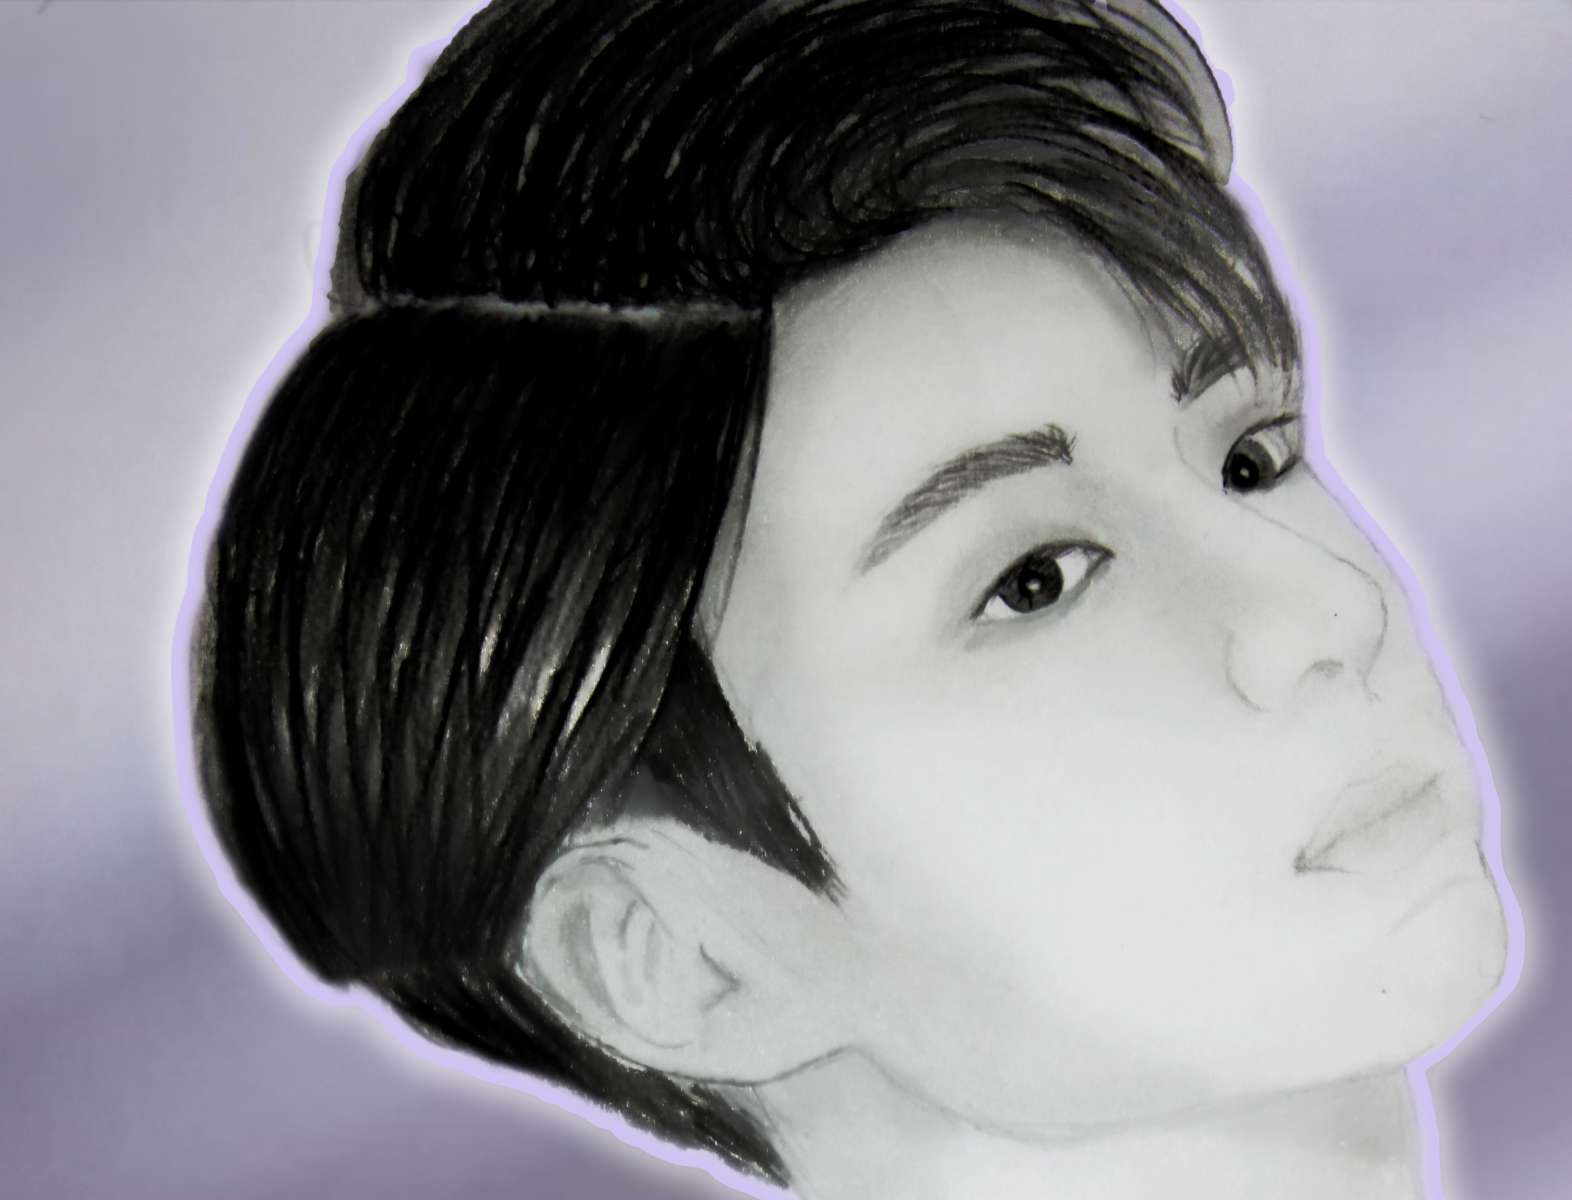 Bts Jungkook  drawings by me   Drawings  Illustration People   Figures Celebrity Musicians  ArtPal